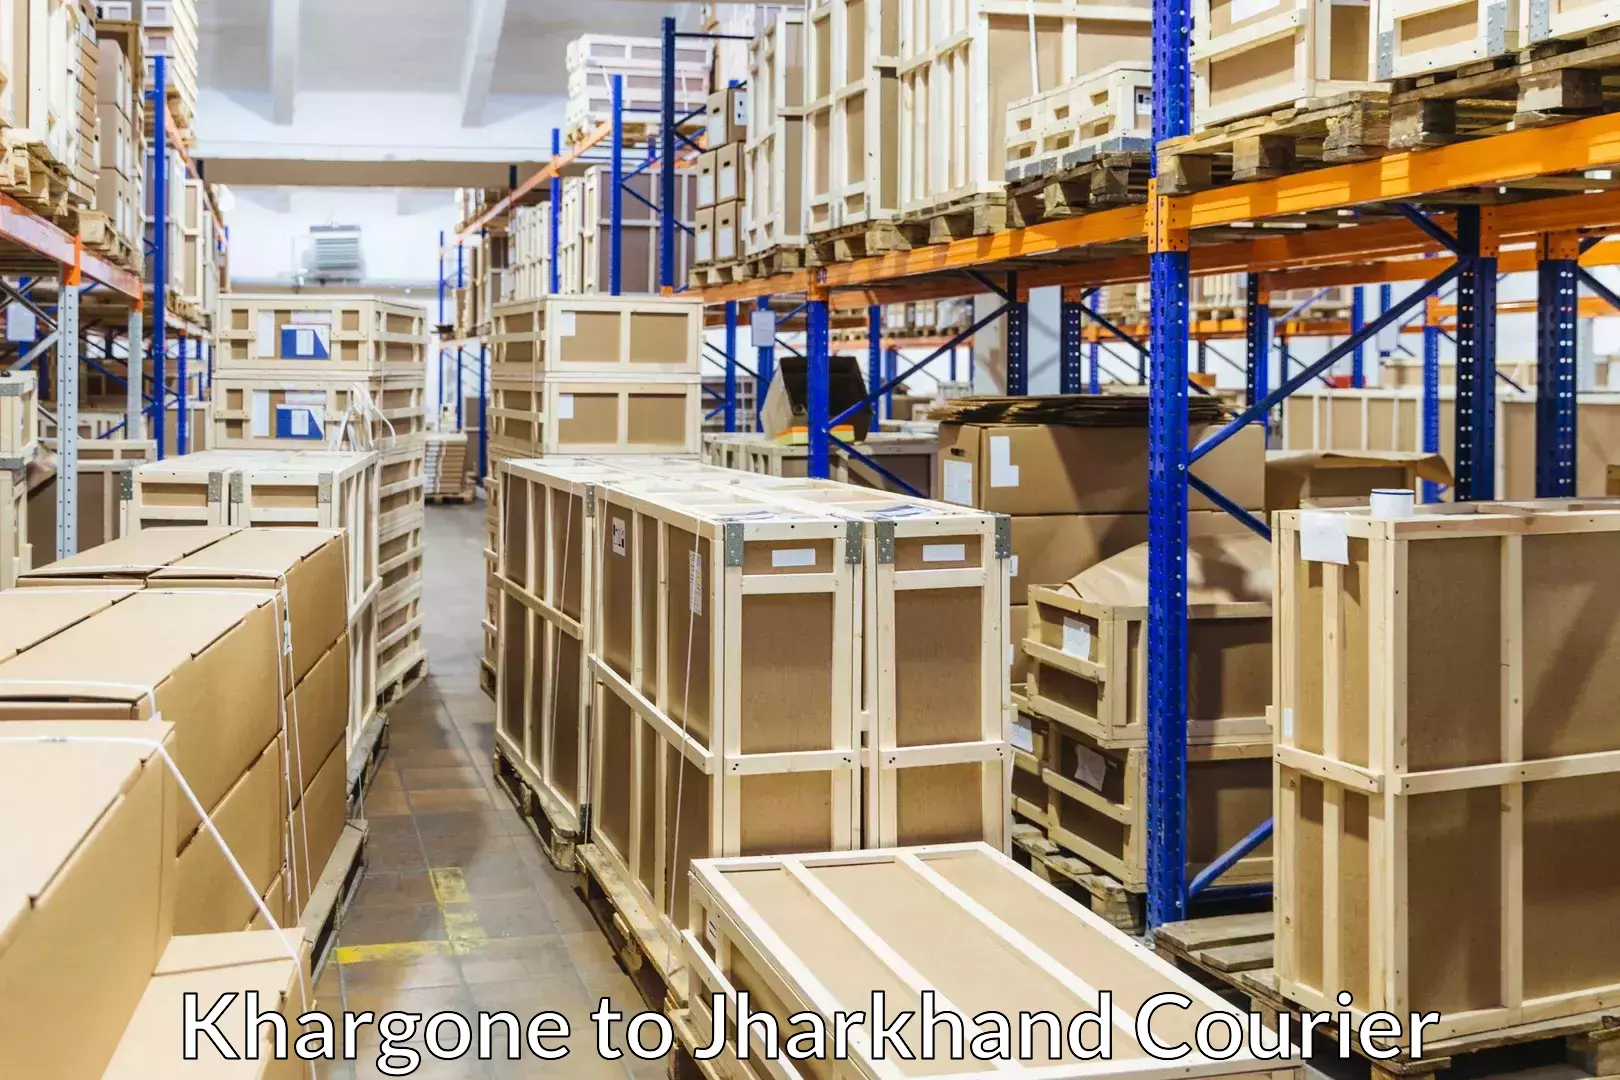 Furniture moving plans Khargone to Jharkhand